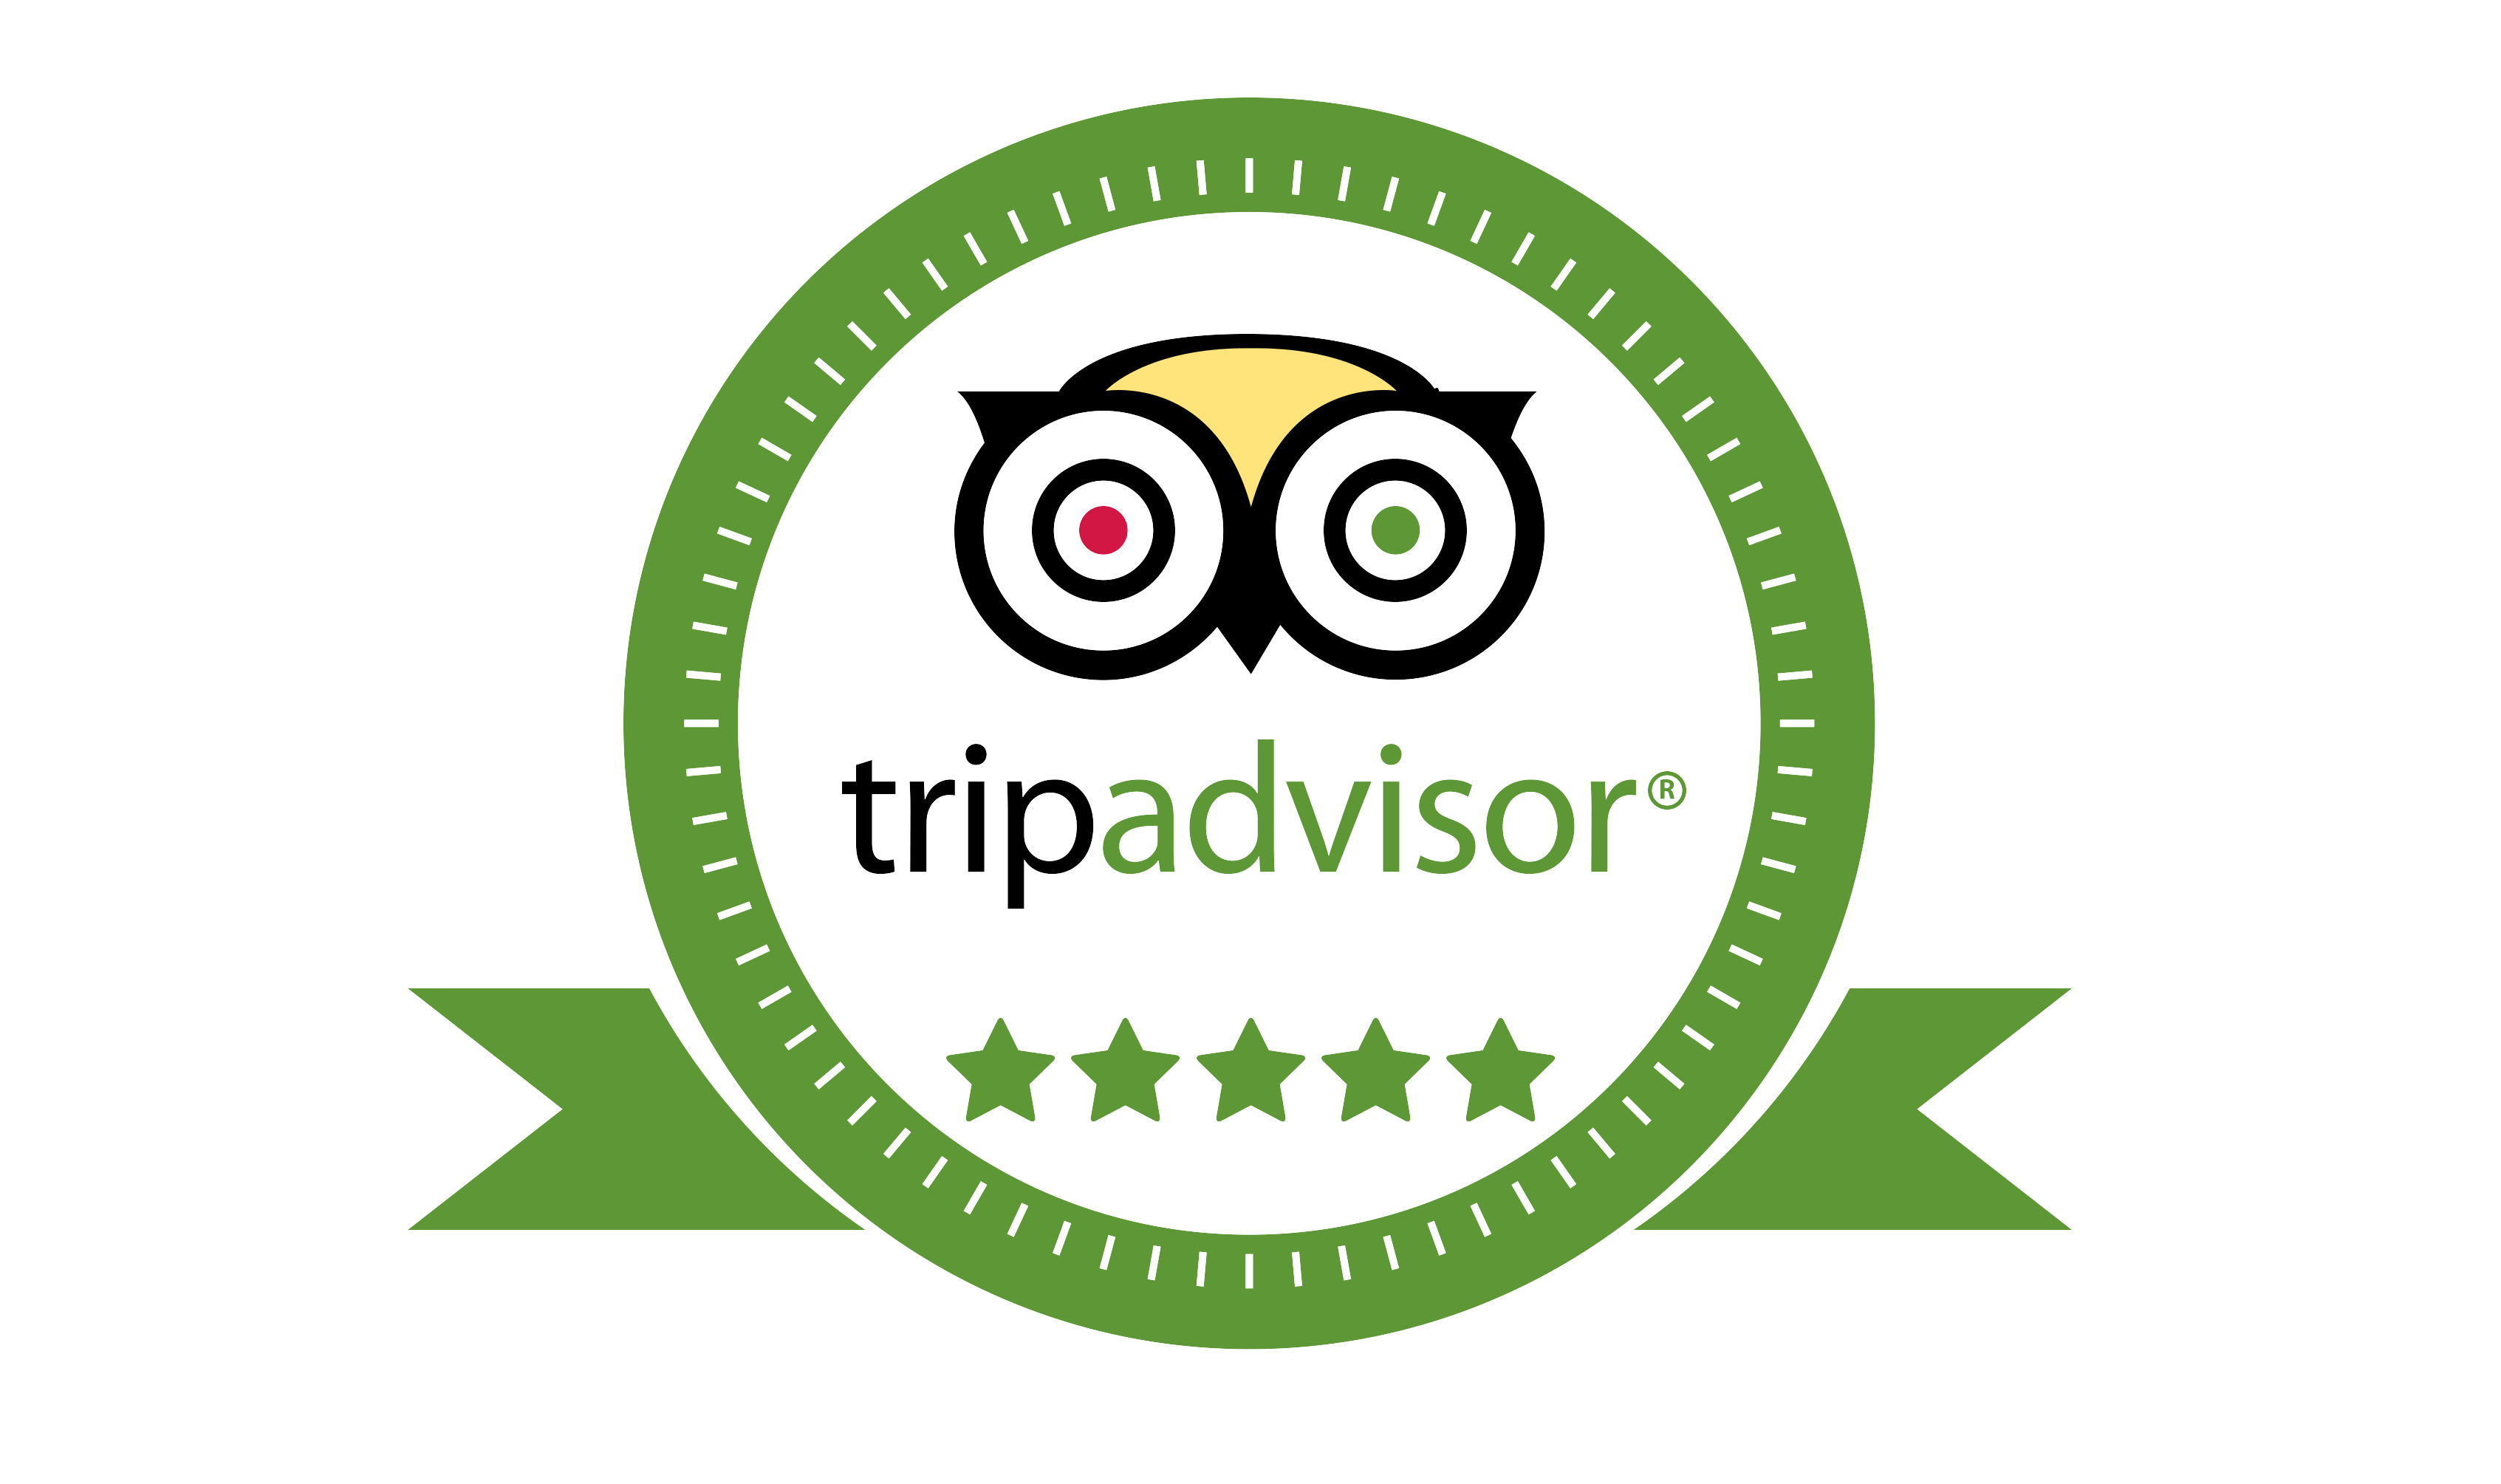 TripAdvisor Recommended Logo - EXCELLENCE CERTIFIED BY TRIP ADVISOR IN 2017